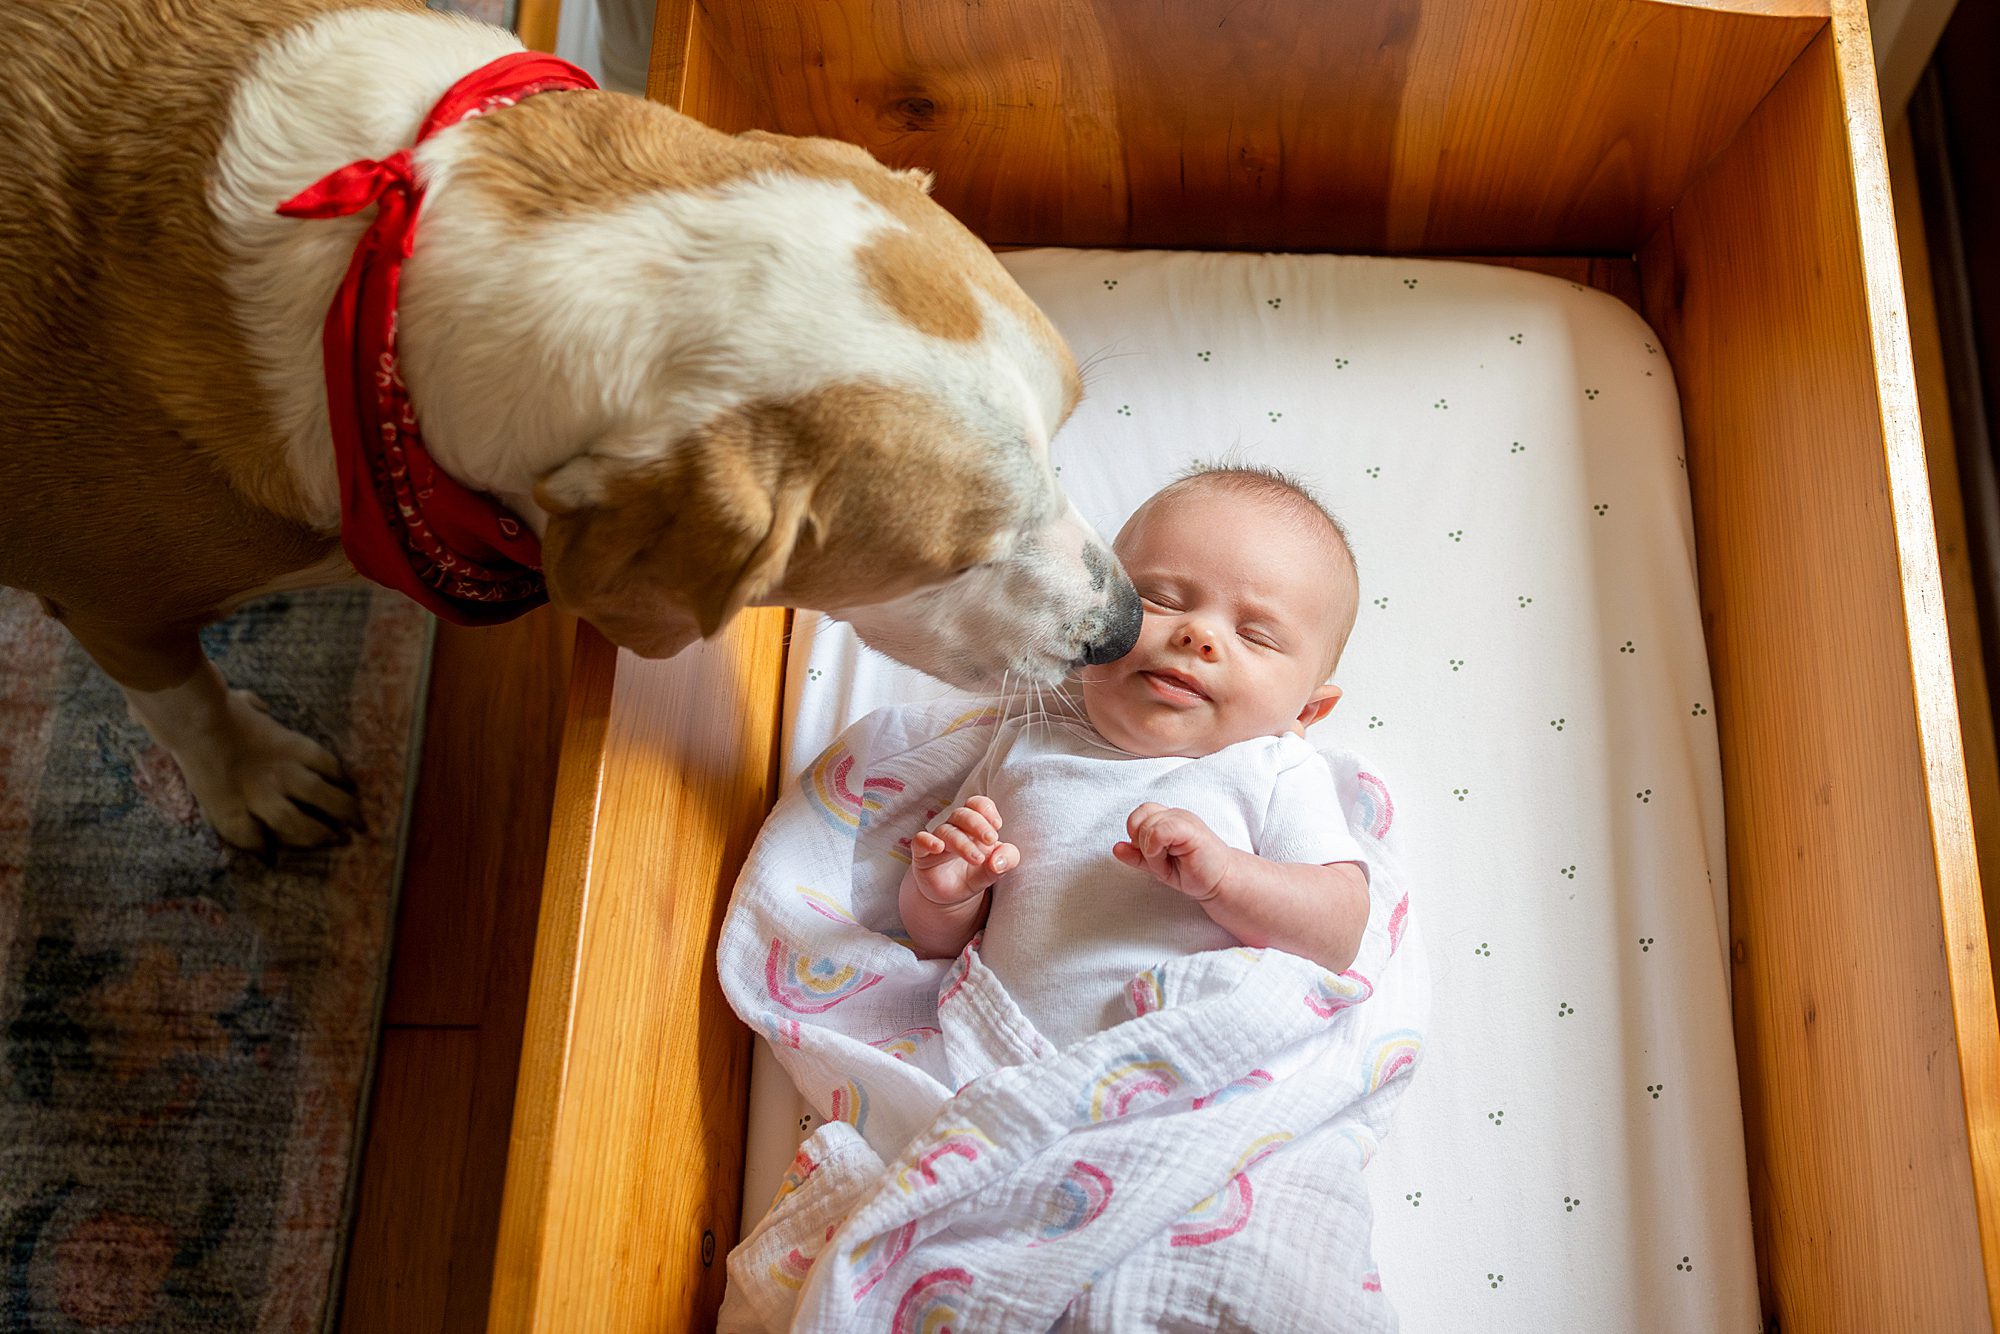 A dog gently sniffing a sleeping baby in a wooden crib.